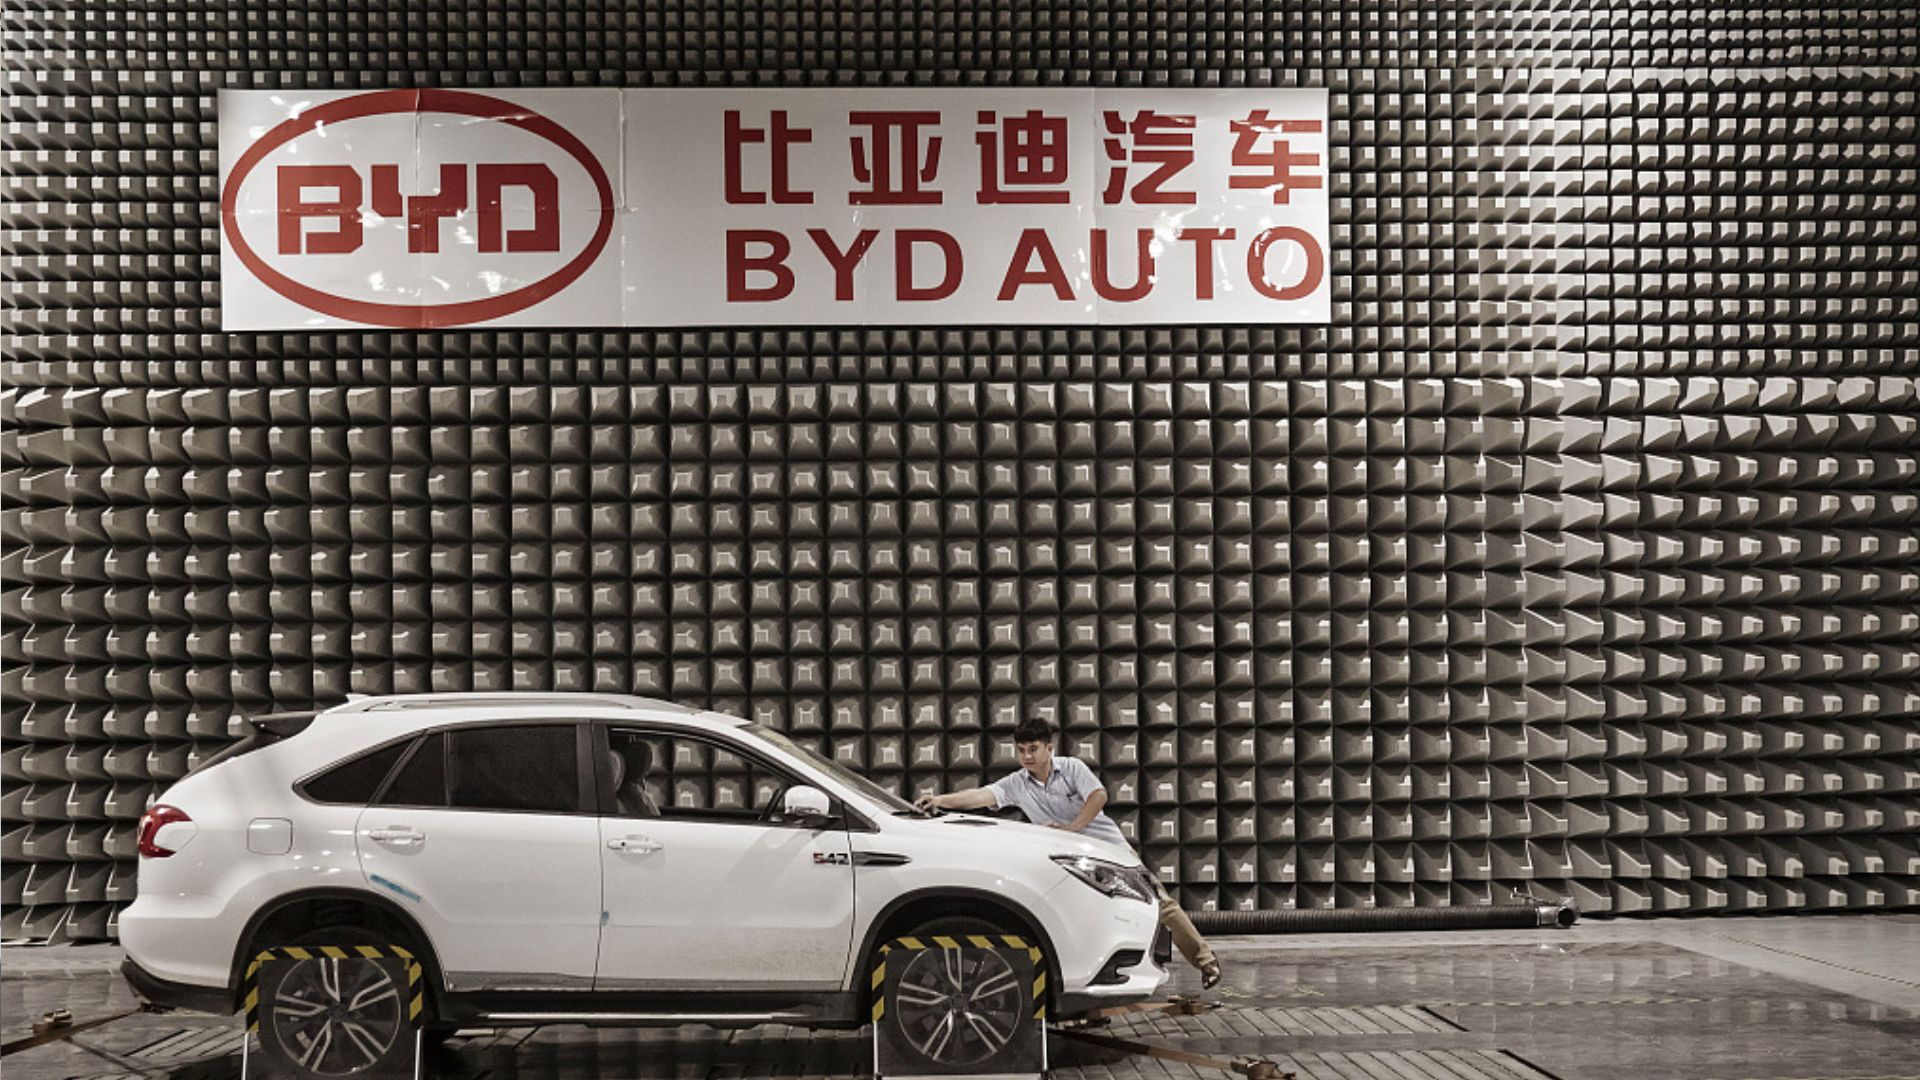 BYD is now is the biggest electric vehicle company in the world. /Qilai Shen/Bloomberg via Getty Images